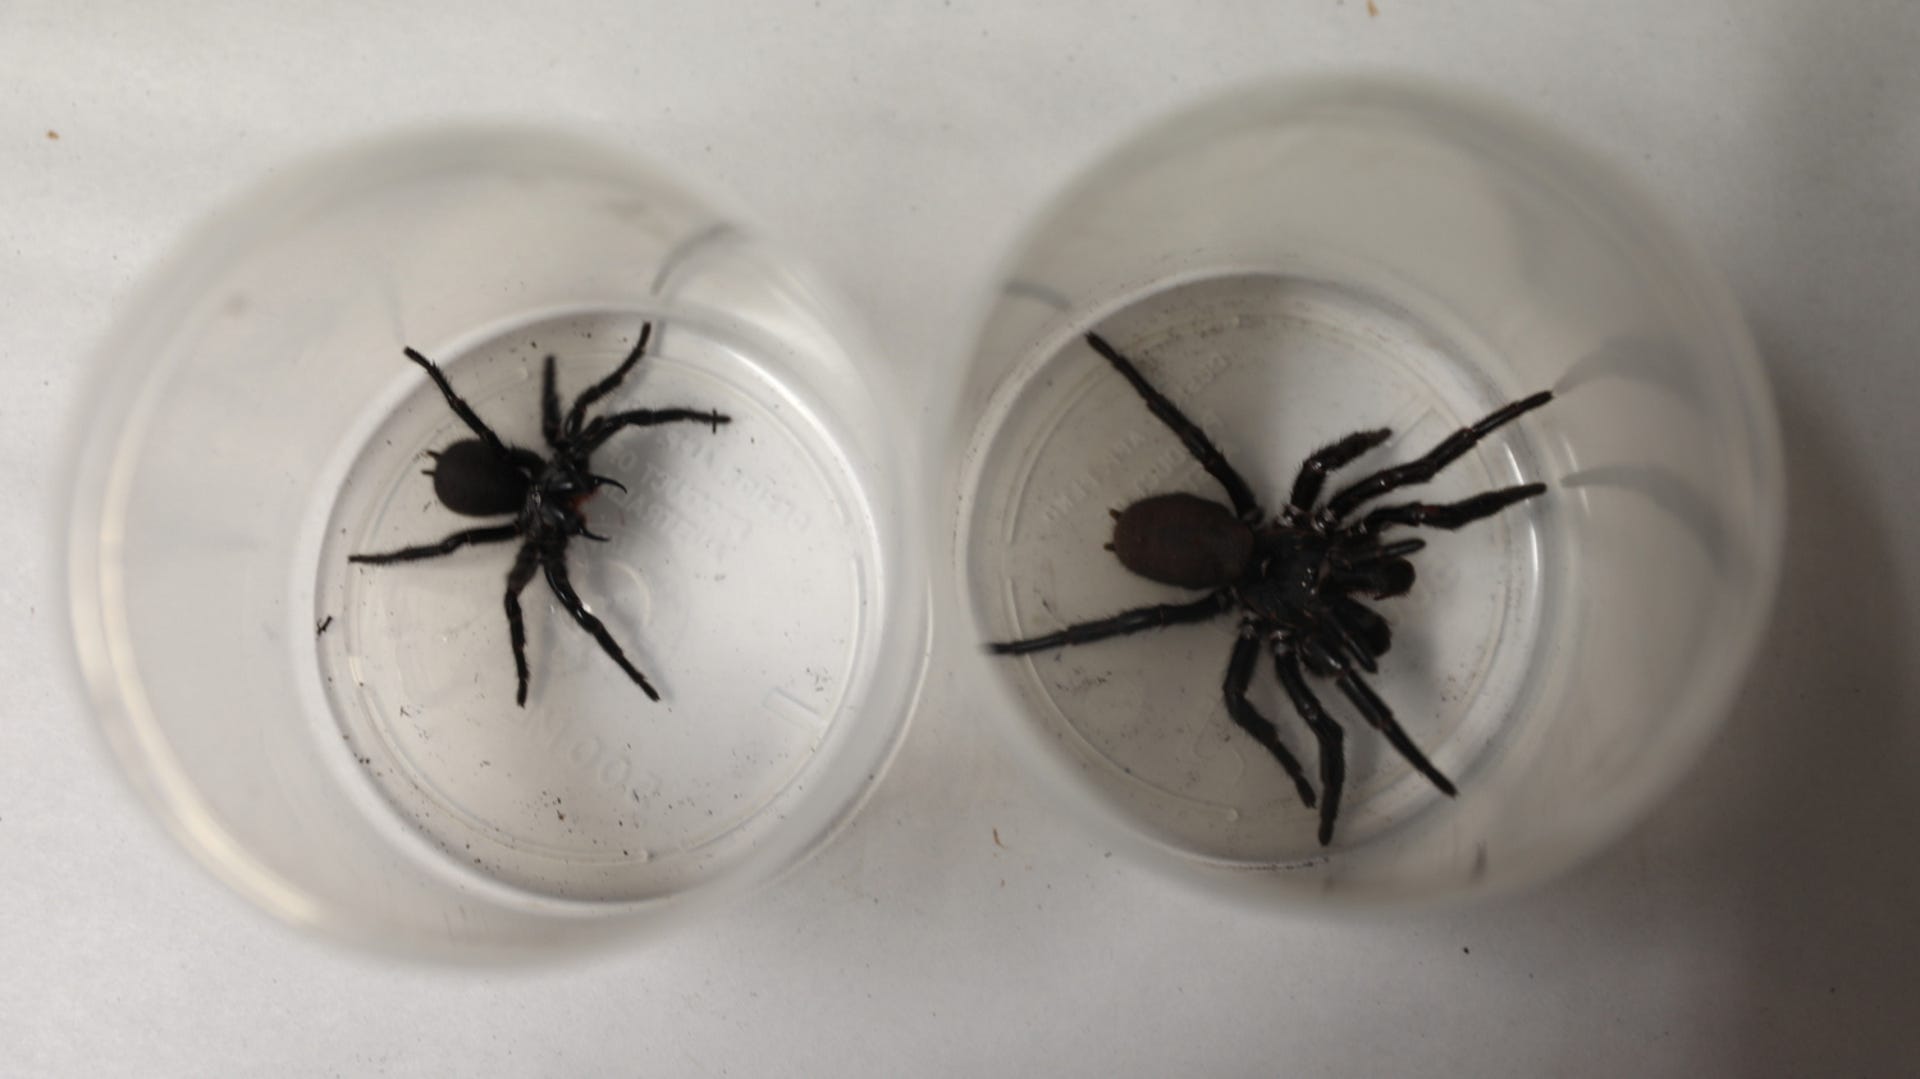 Is this too many funnel-web spiders? Spider unboxing 